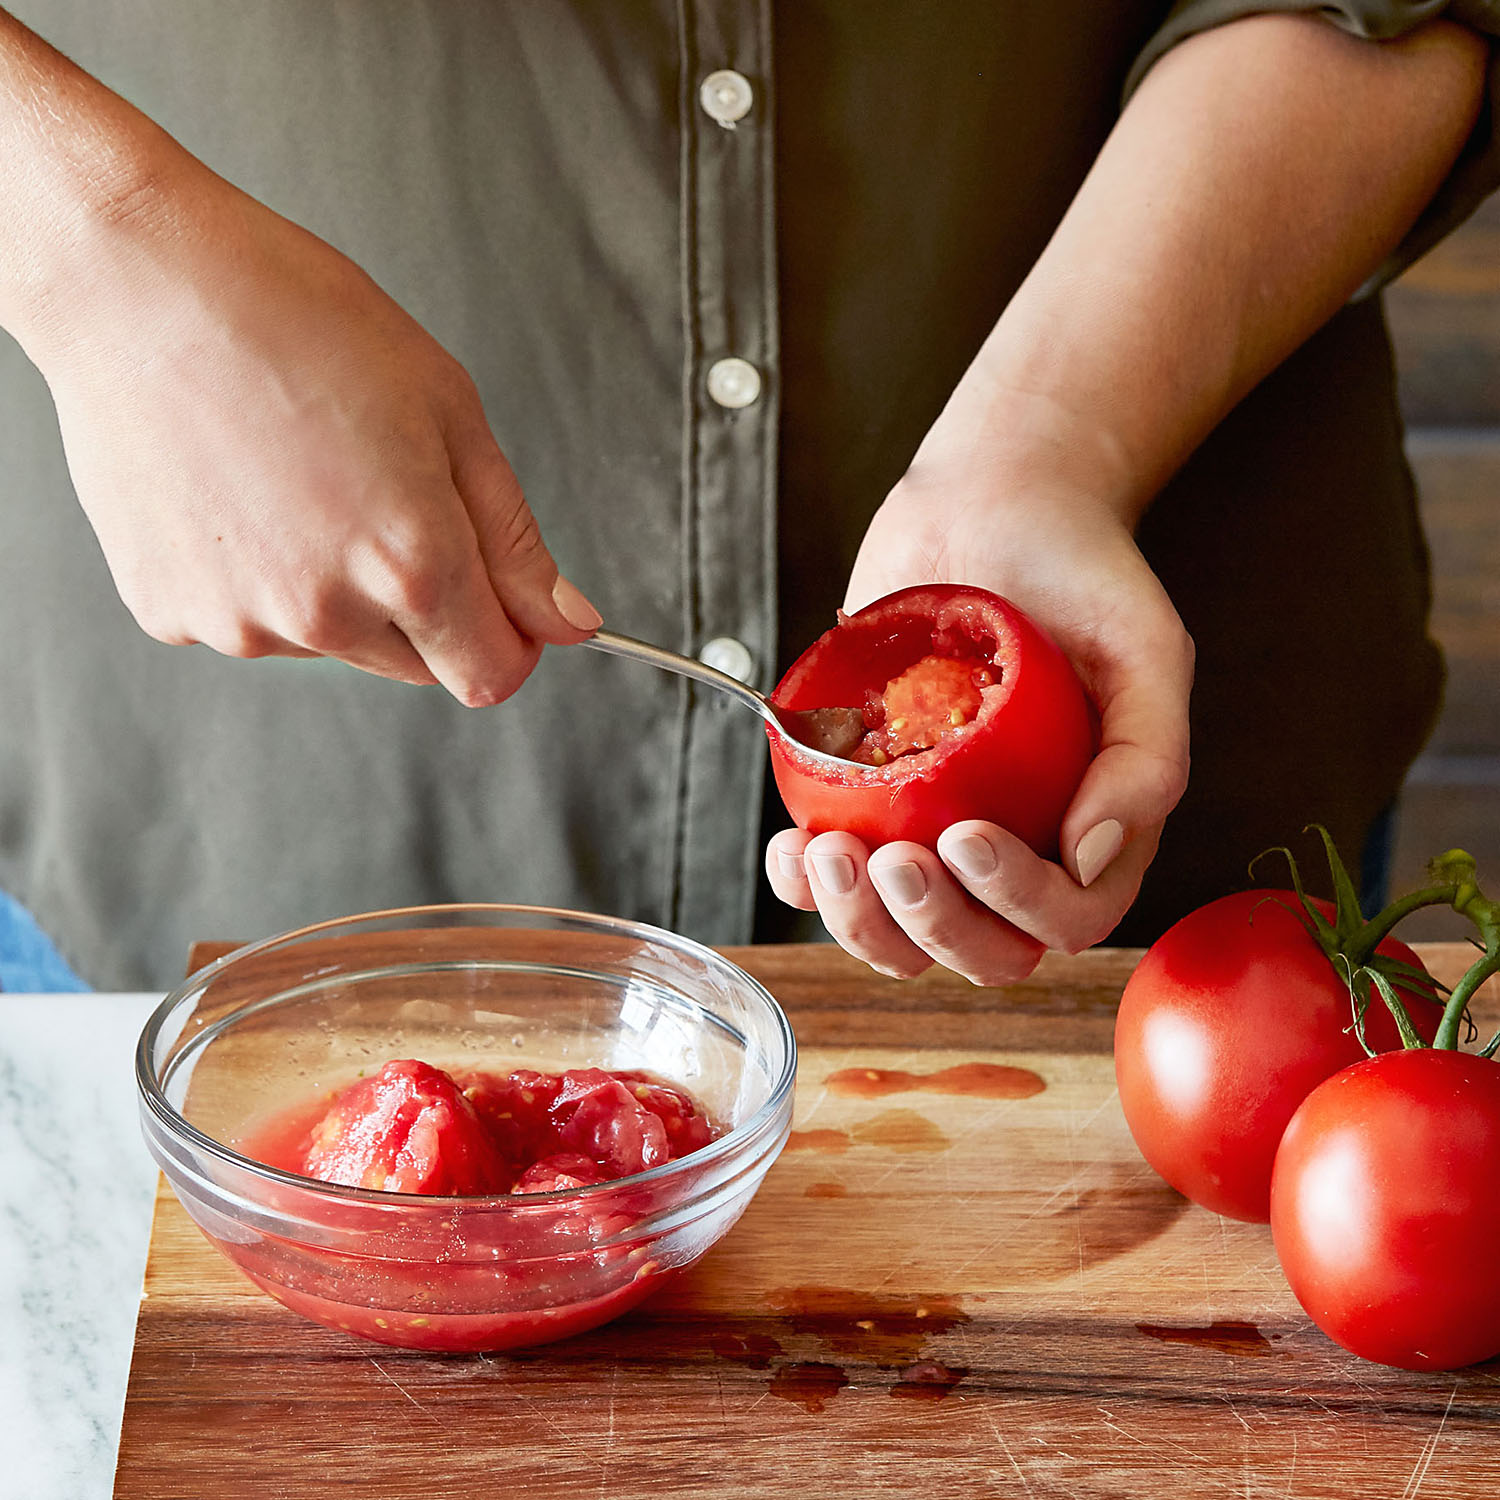 Watch & Learn scooping out tomatoes